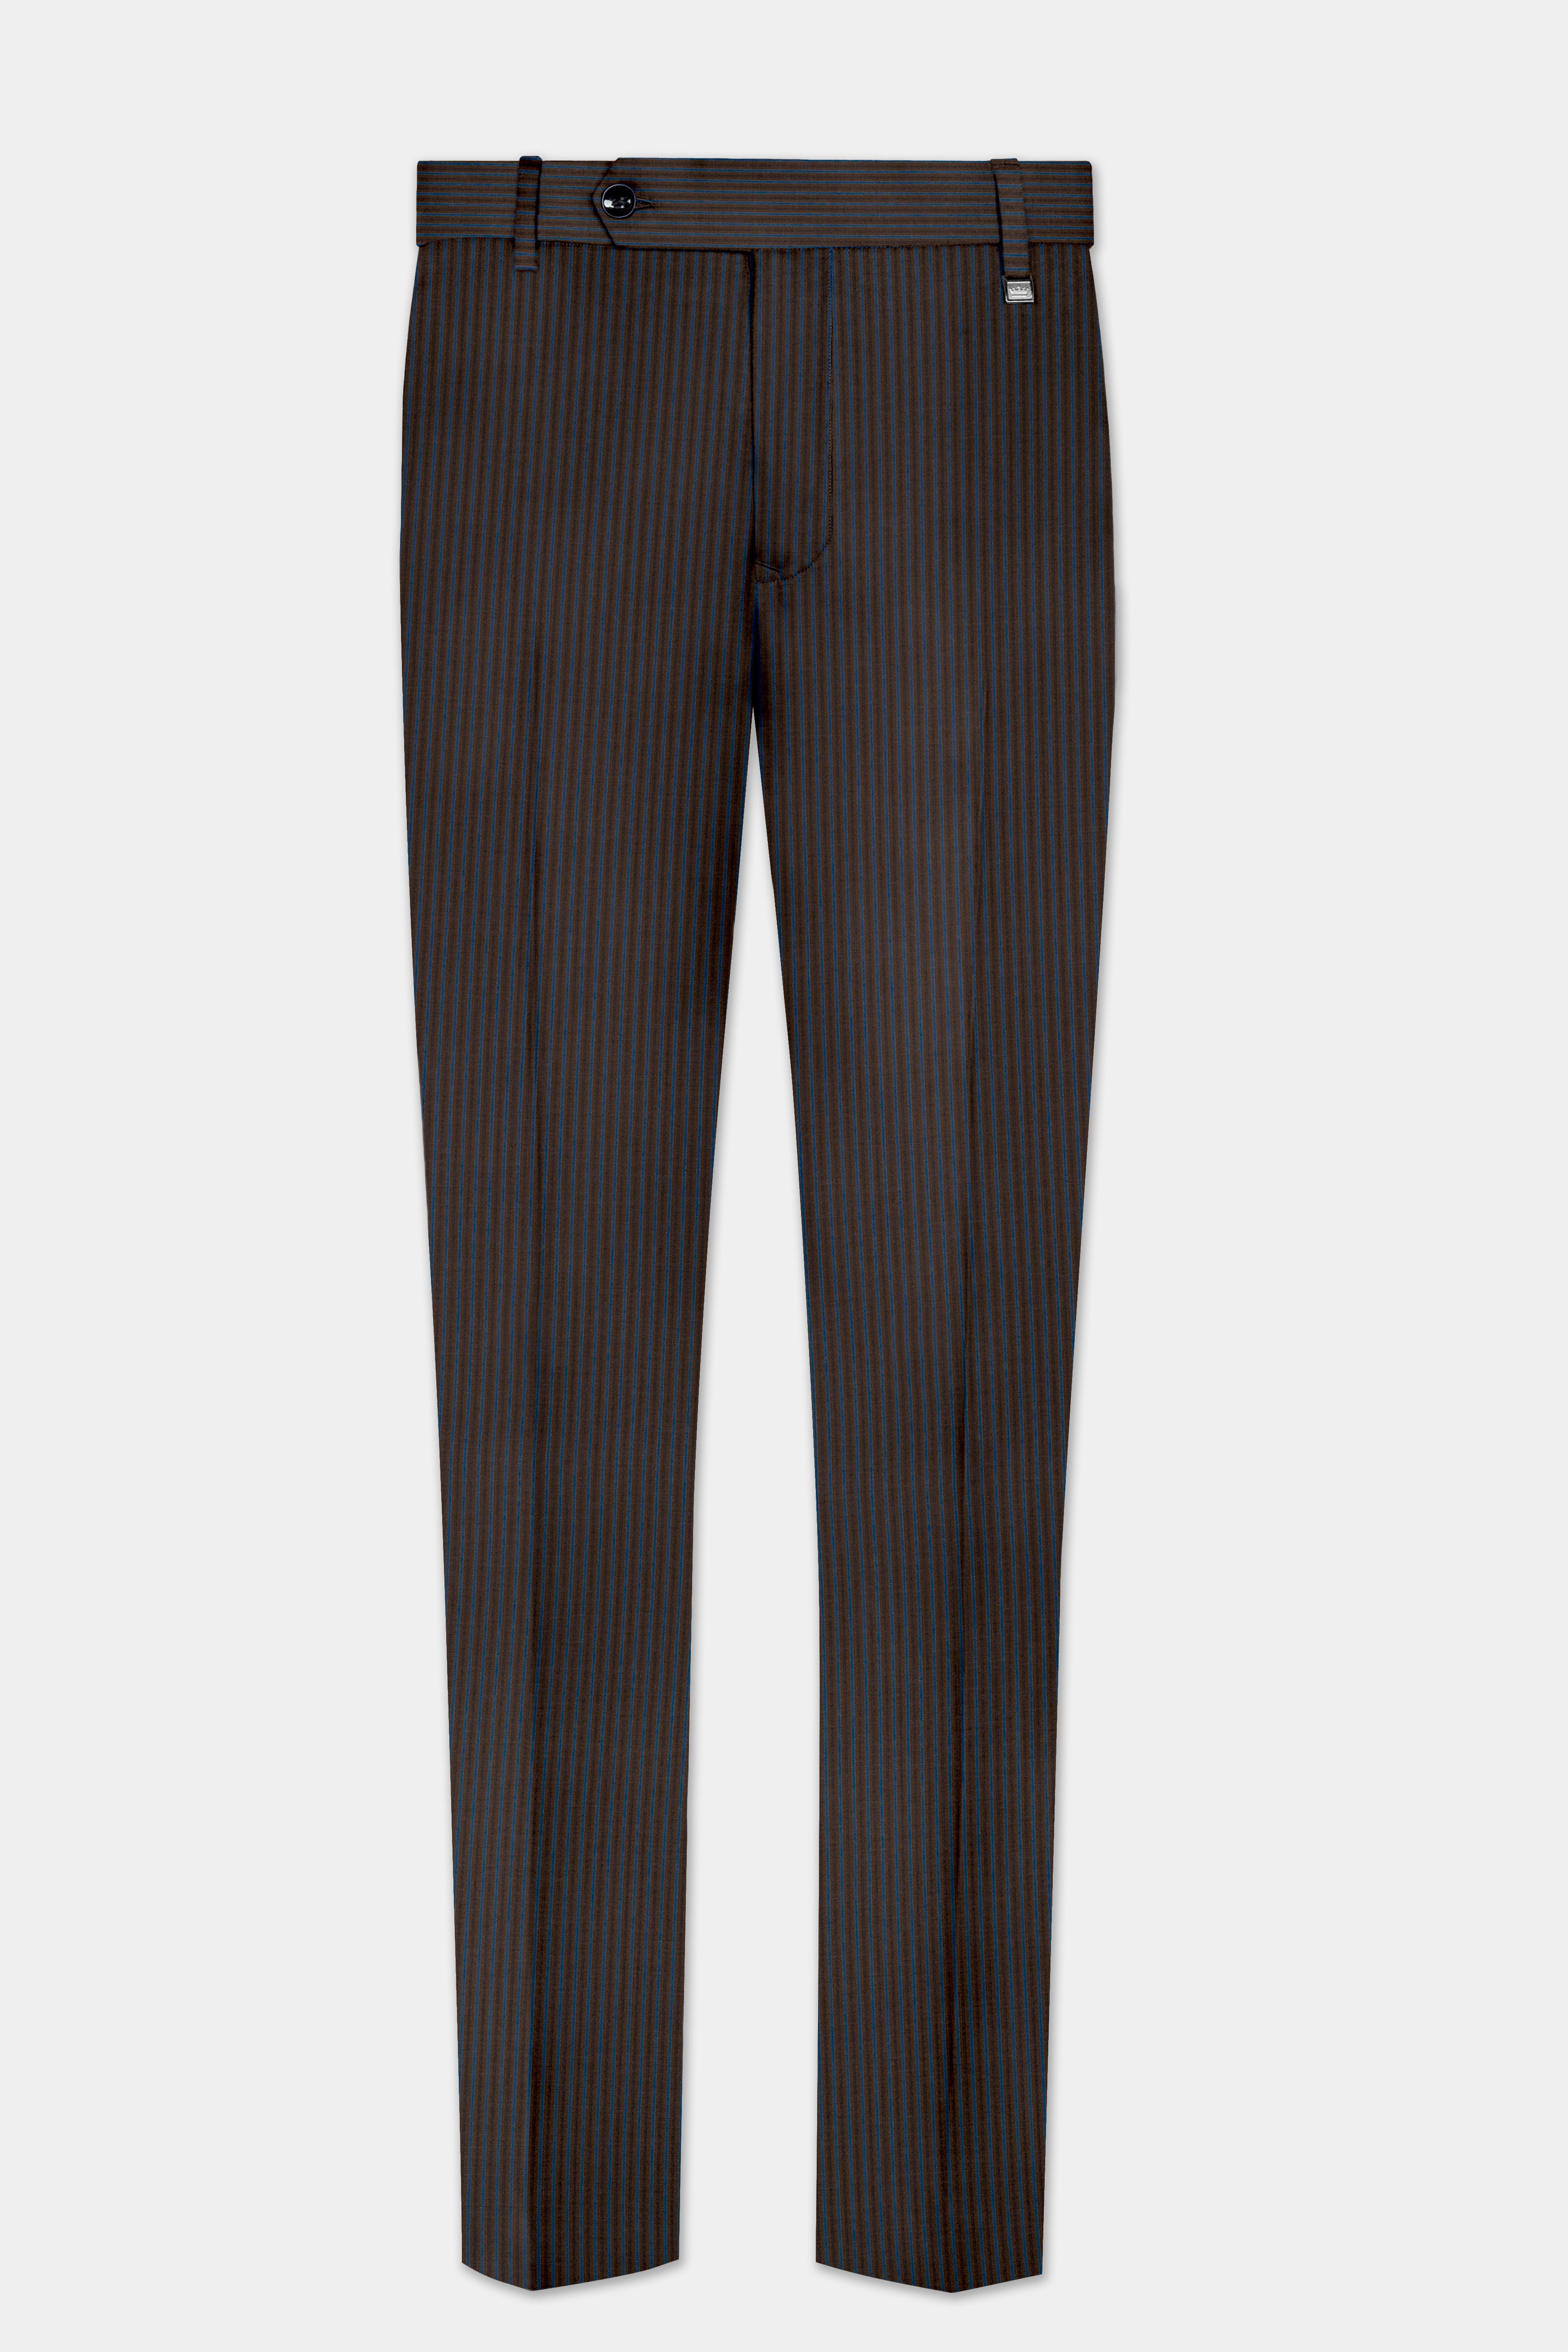 Eclipse Brown with Kashmir Blue Striped Wool Blend Double Breasted Suit